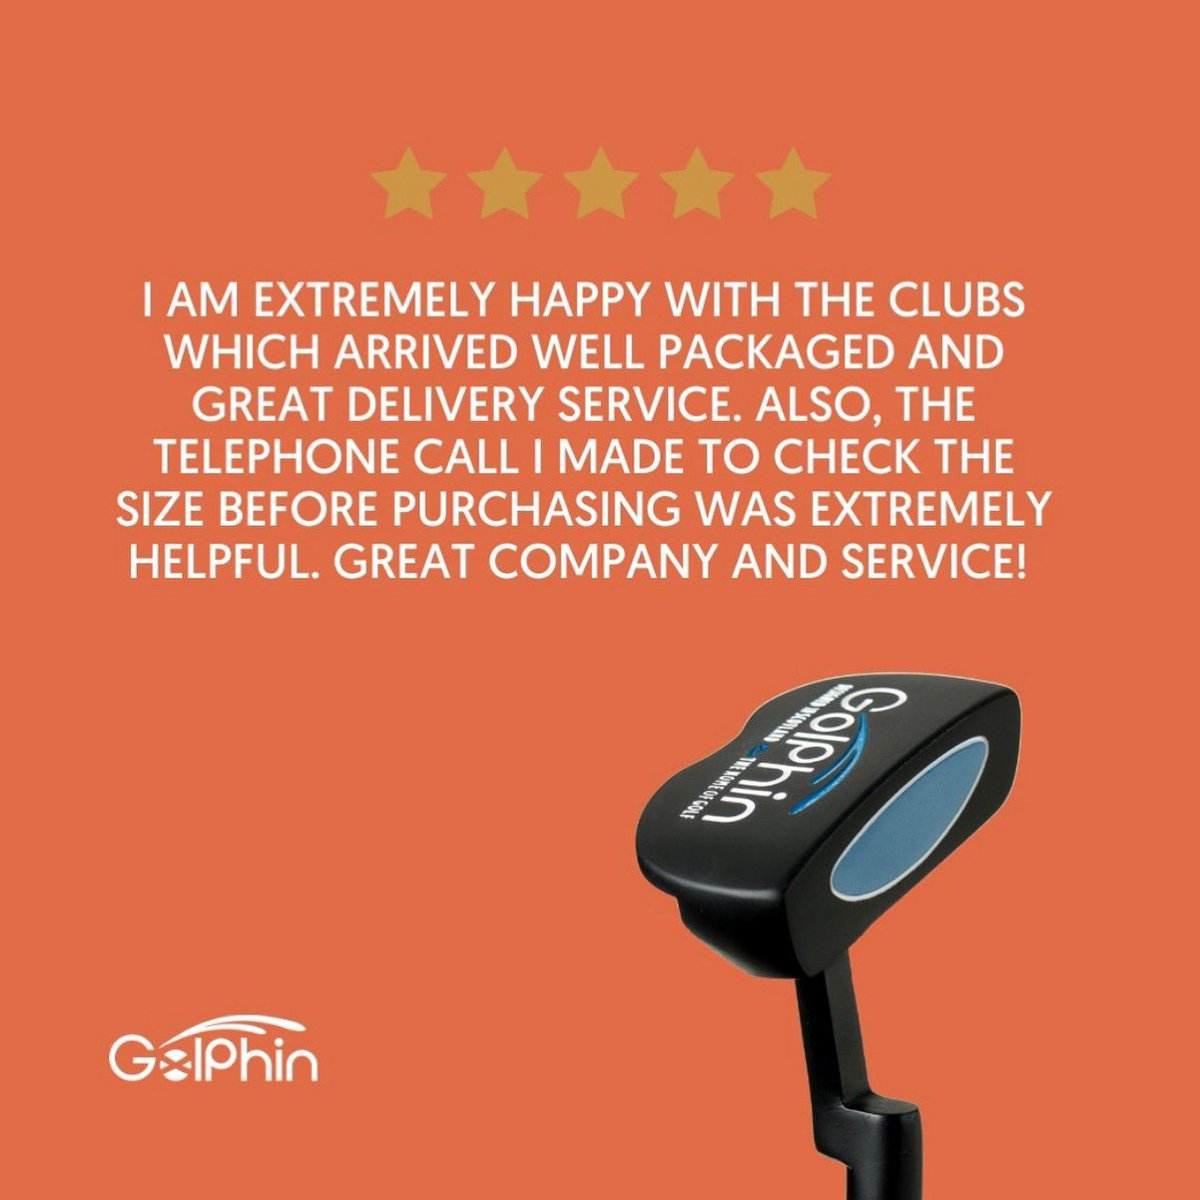 ⭐⭐⭐⭐⭐ A customer’s recent review about their service with GolPhin! ⛳